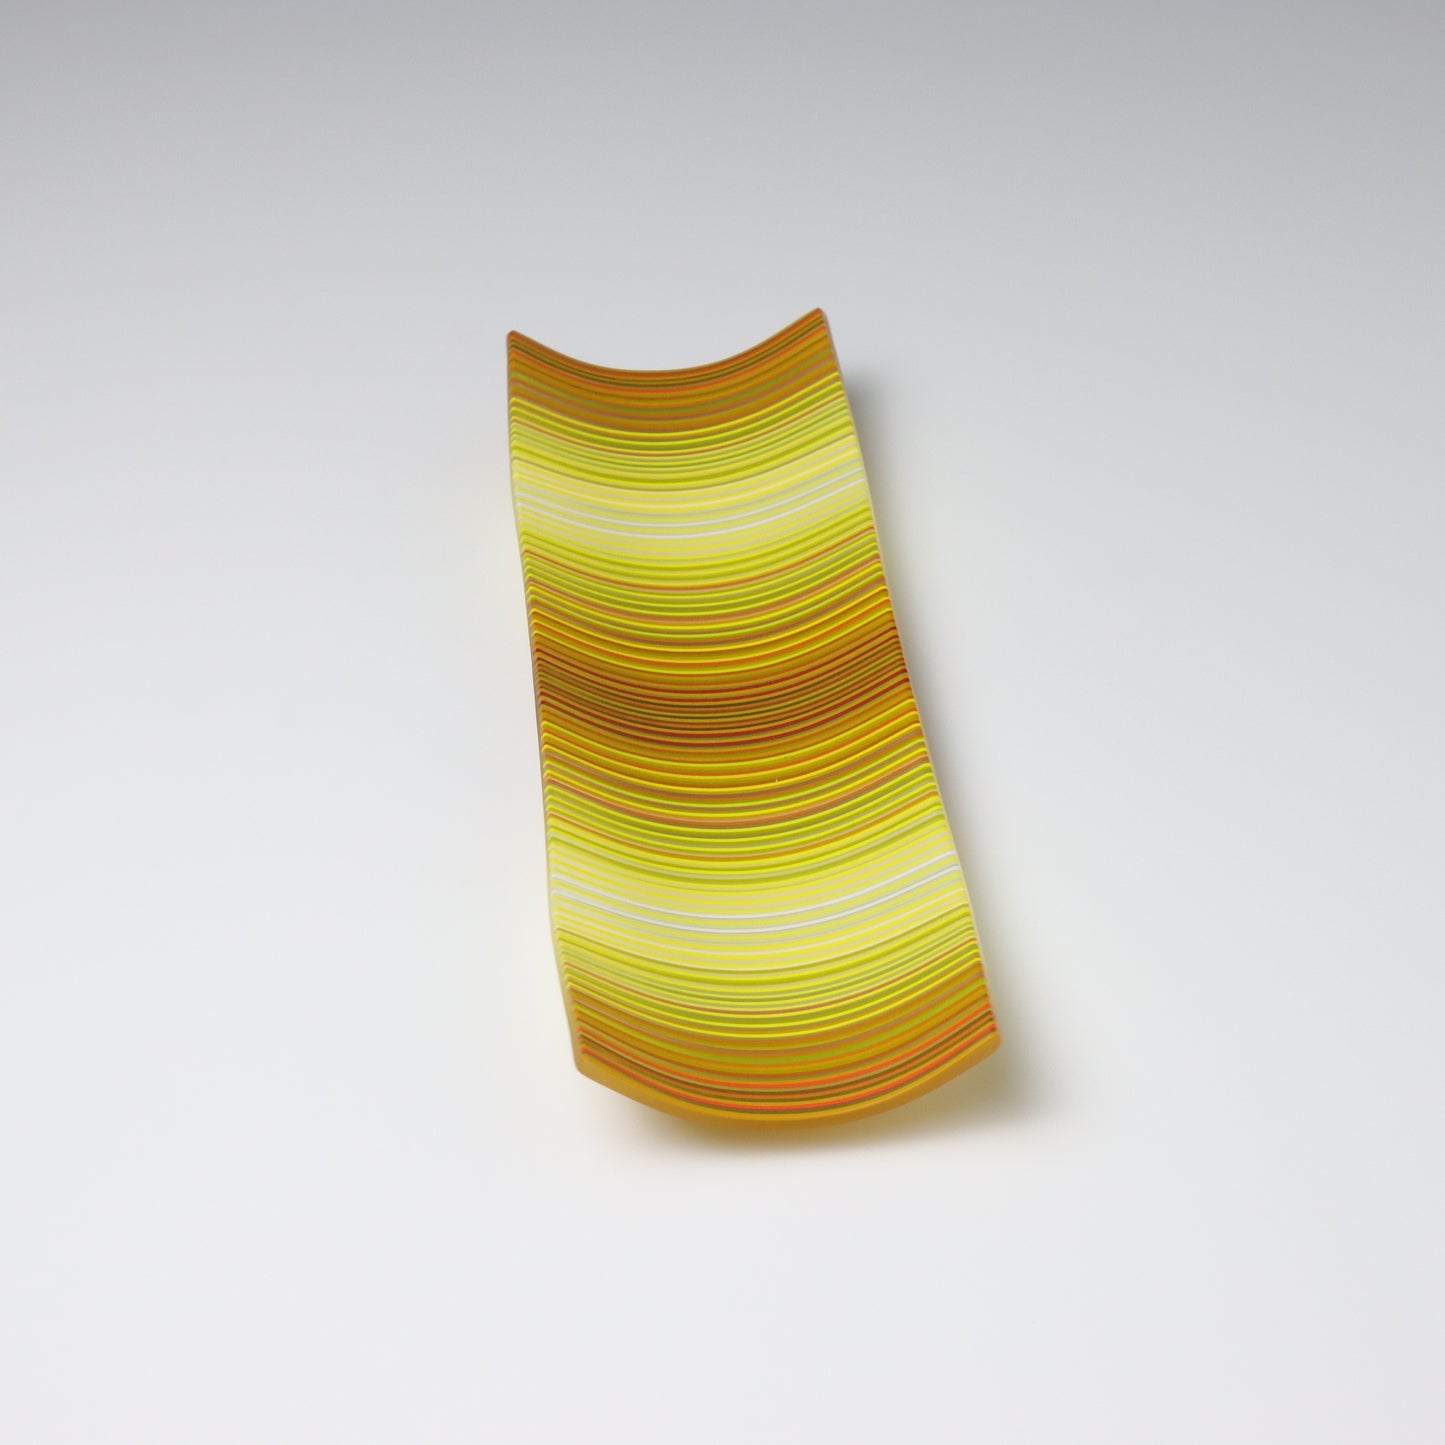 S2120 | Rectangular Shaped ColourWave Glass Plate | Golden Brown and Yellow